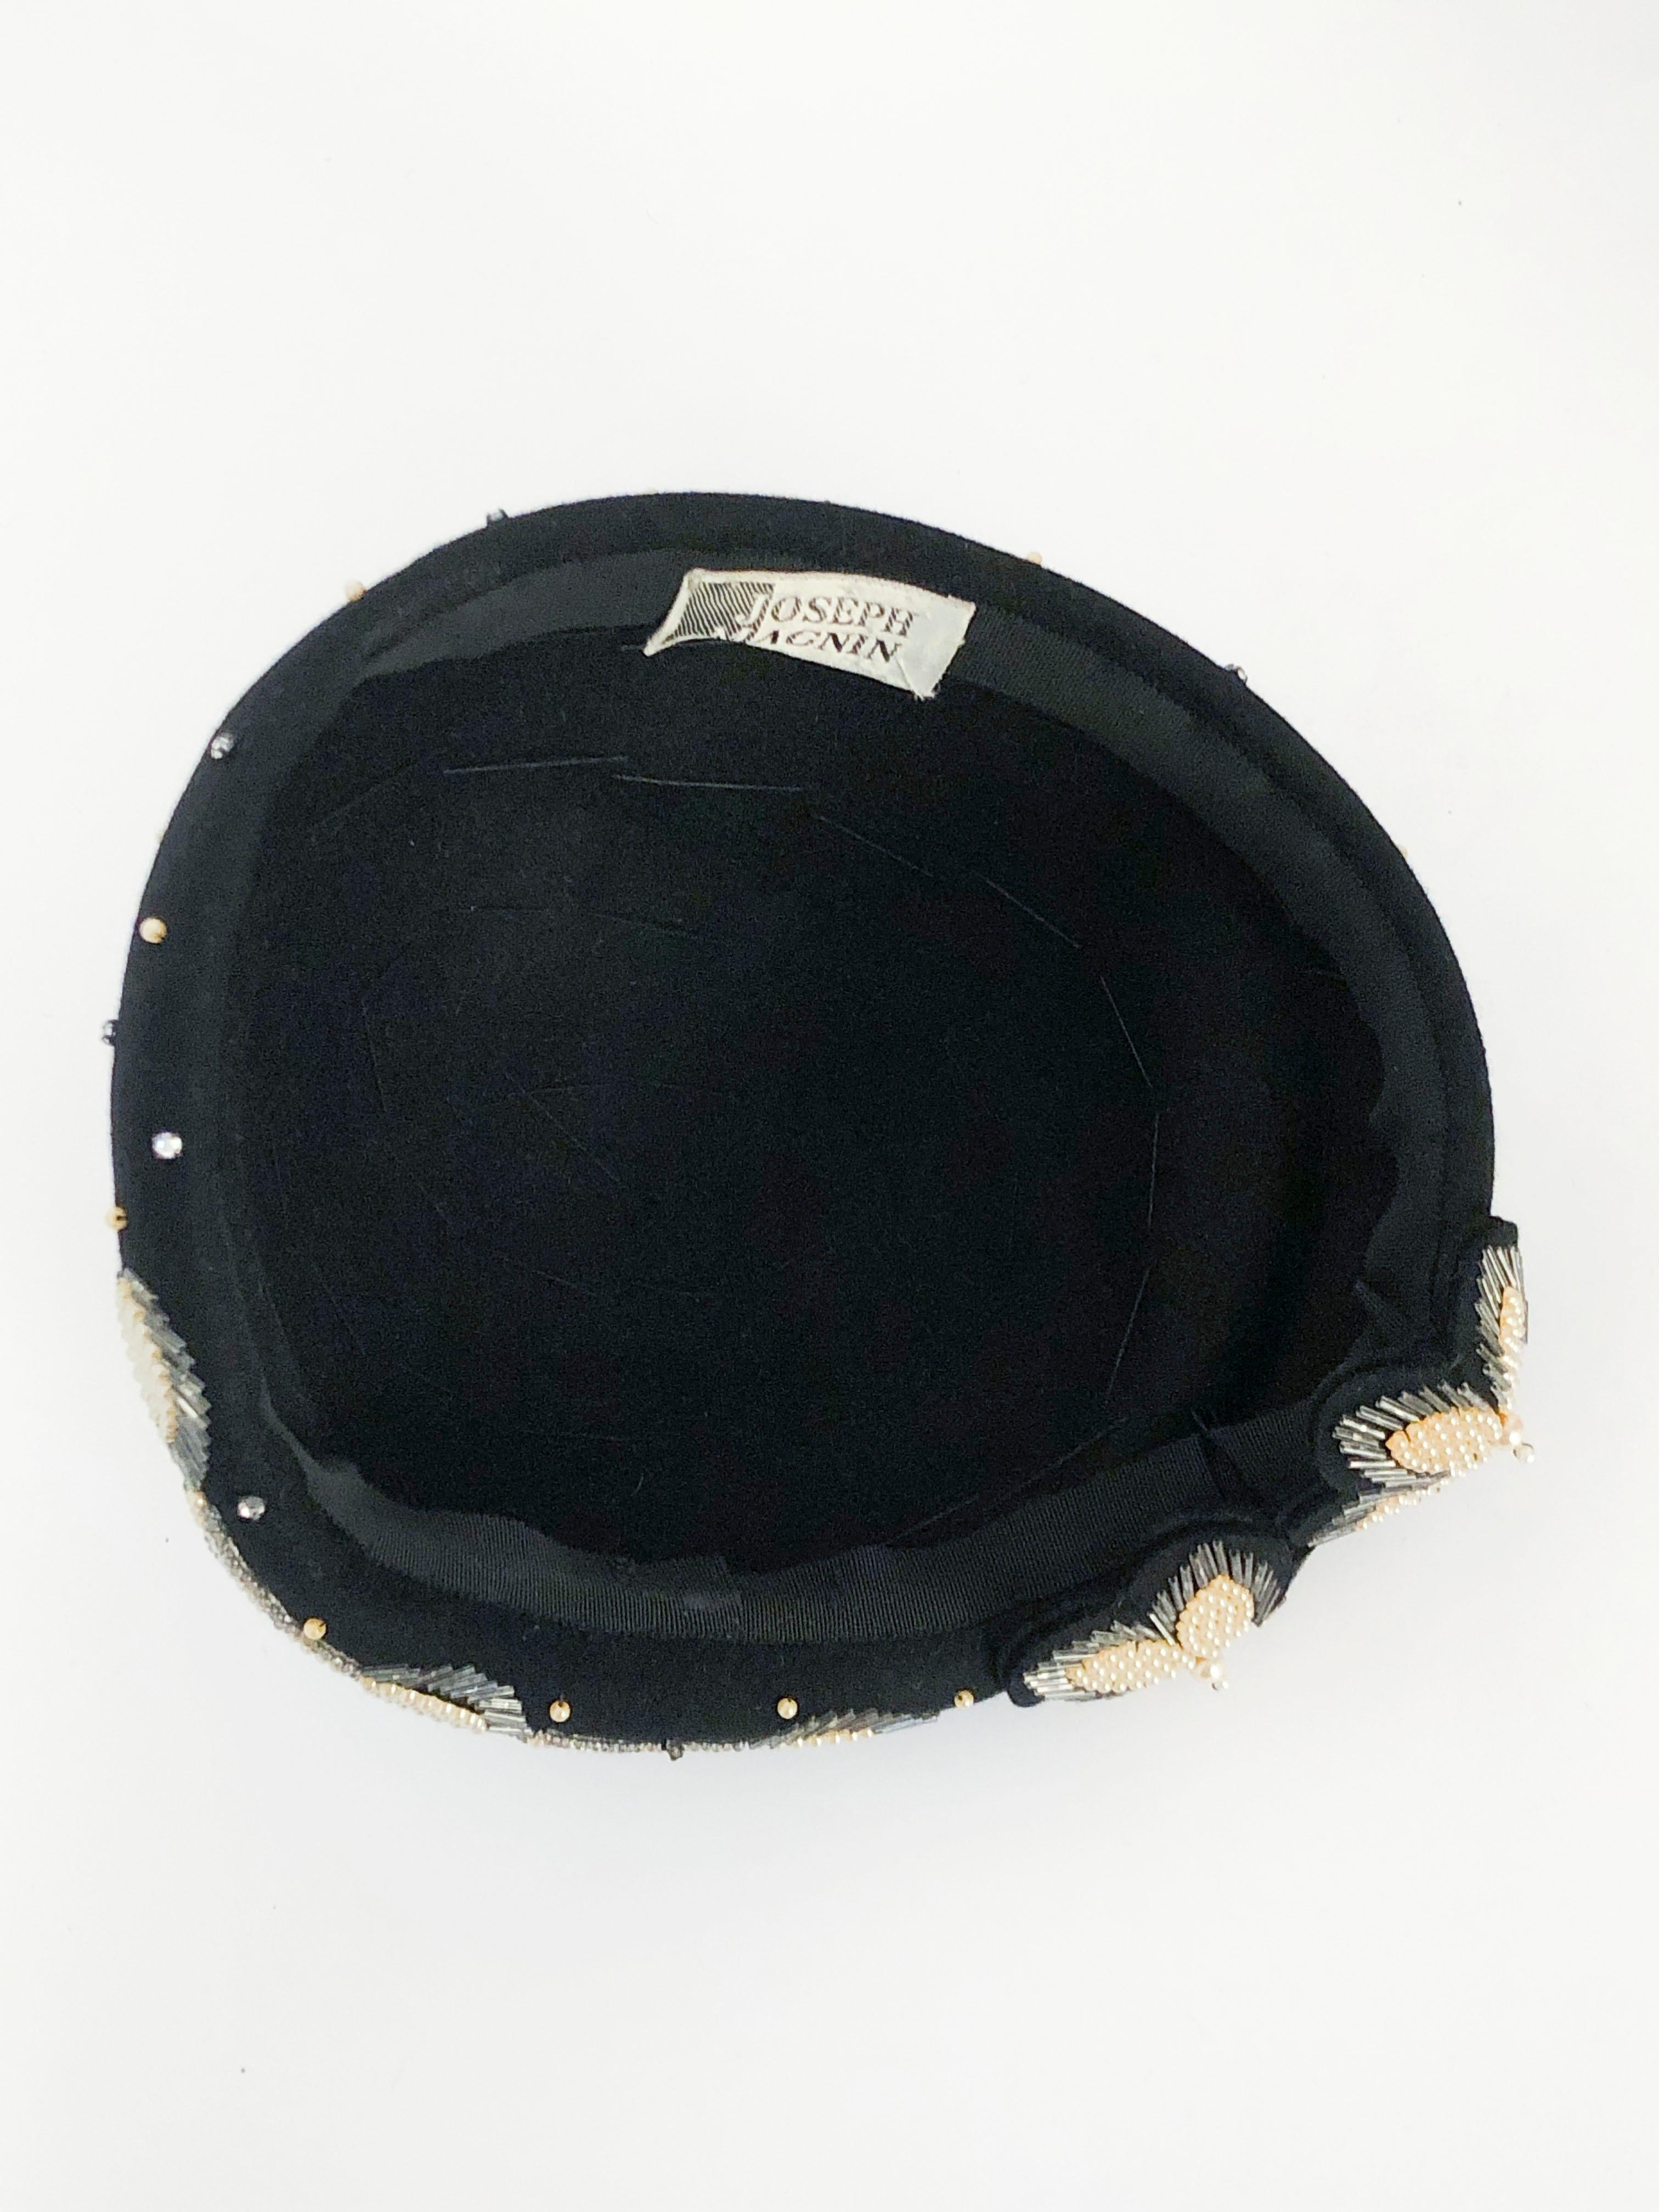 1950s Joseph Magnin Black Cashmere Hat with Beading and Stone Accents 2